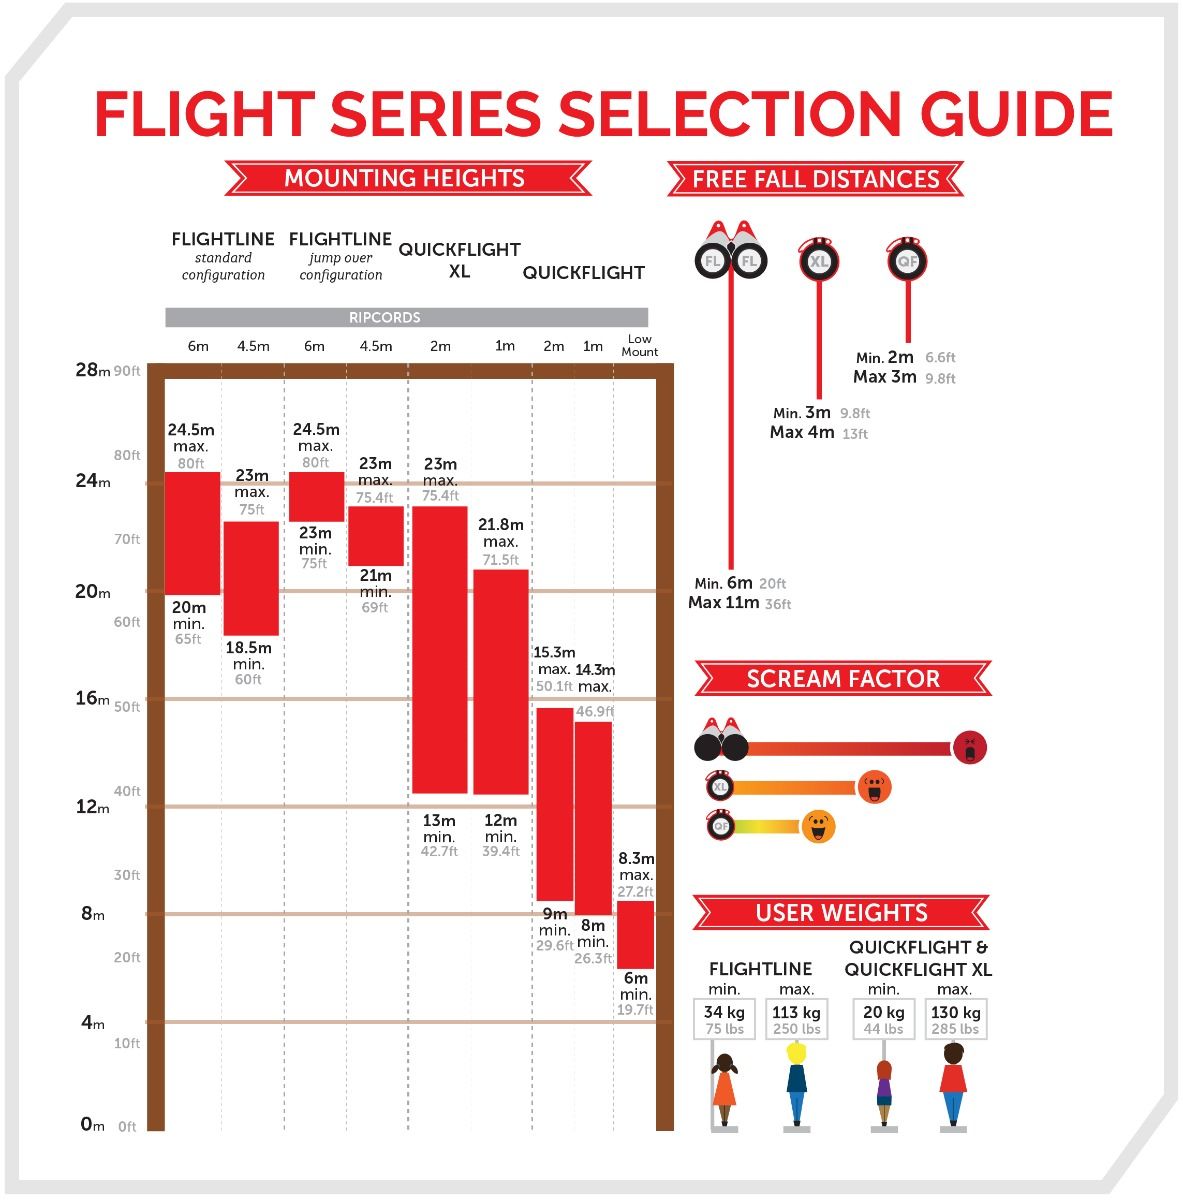 QUICKflight Free Fall Device and FlightLine Free Fall Device Selection Guide based on mounting height and free fall distance.